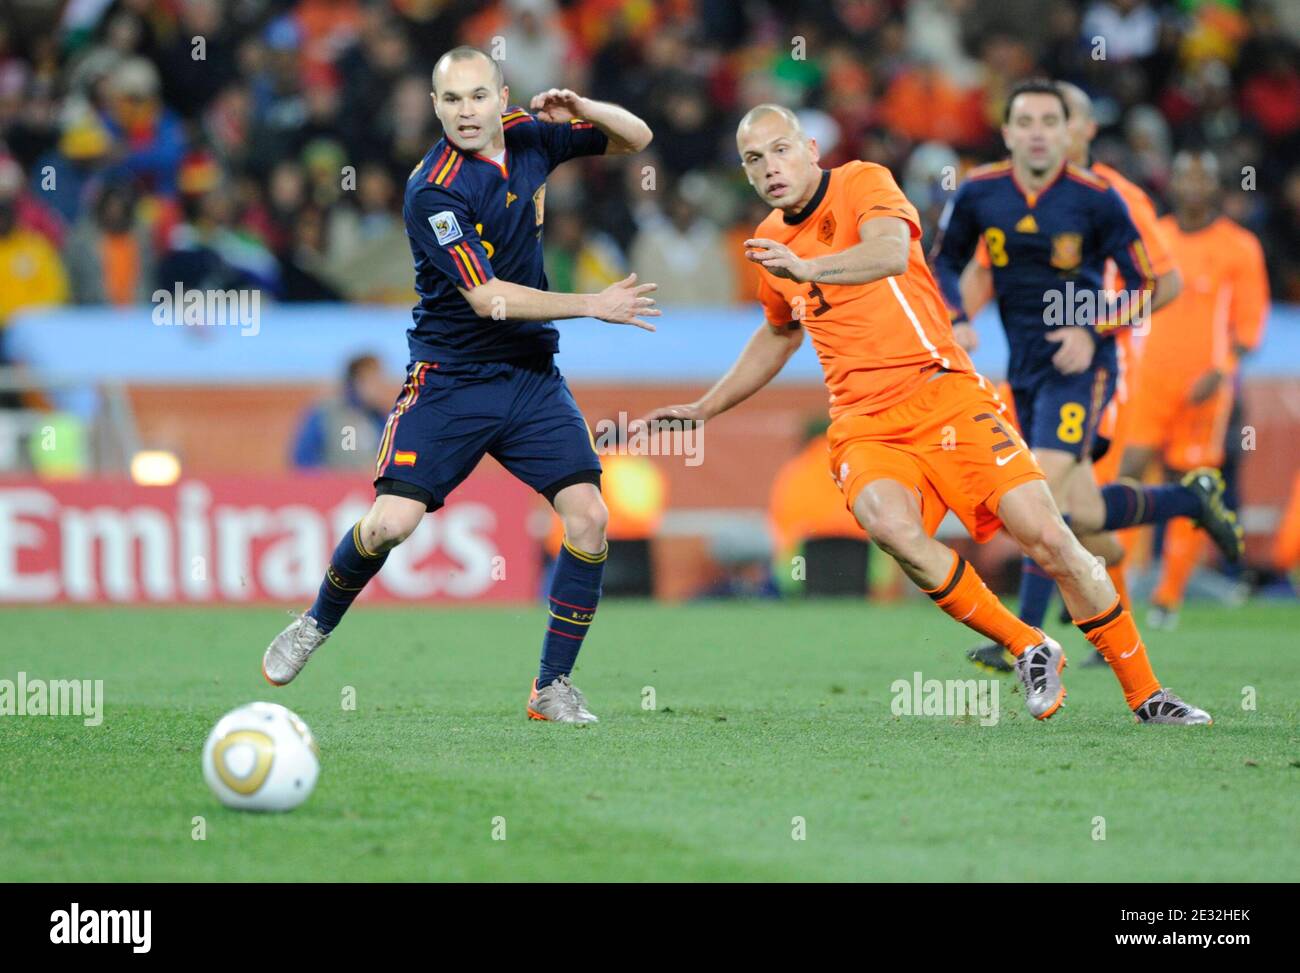 Spain's Andres Iniesta battles Netherlands's John Heitinga during the 2010 FIFA World Cup South Africa Final Soccer match, Spain vs Netherlands at Soccer City football stadium in Johannesburg, South Africa on July 11th, 2010. Spain won 1-0. Photo by Henri Szwarc/ABACAPRESS.COM Stock Photo